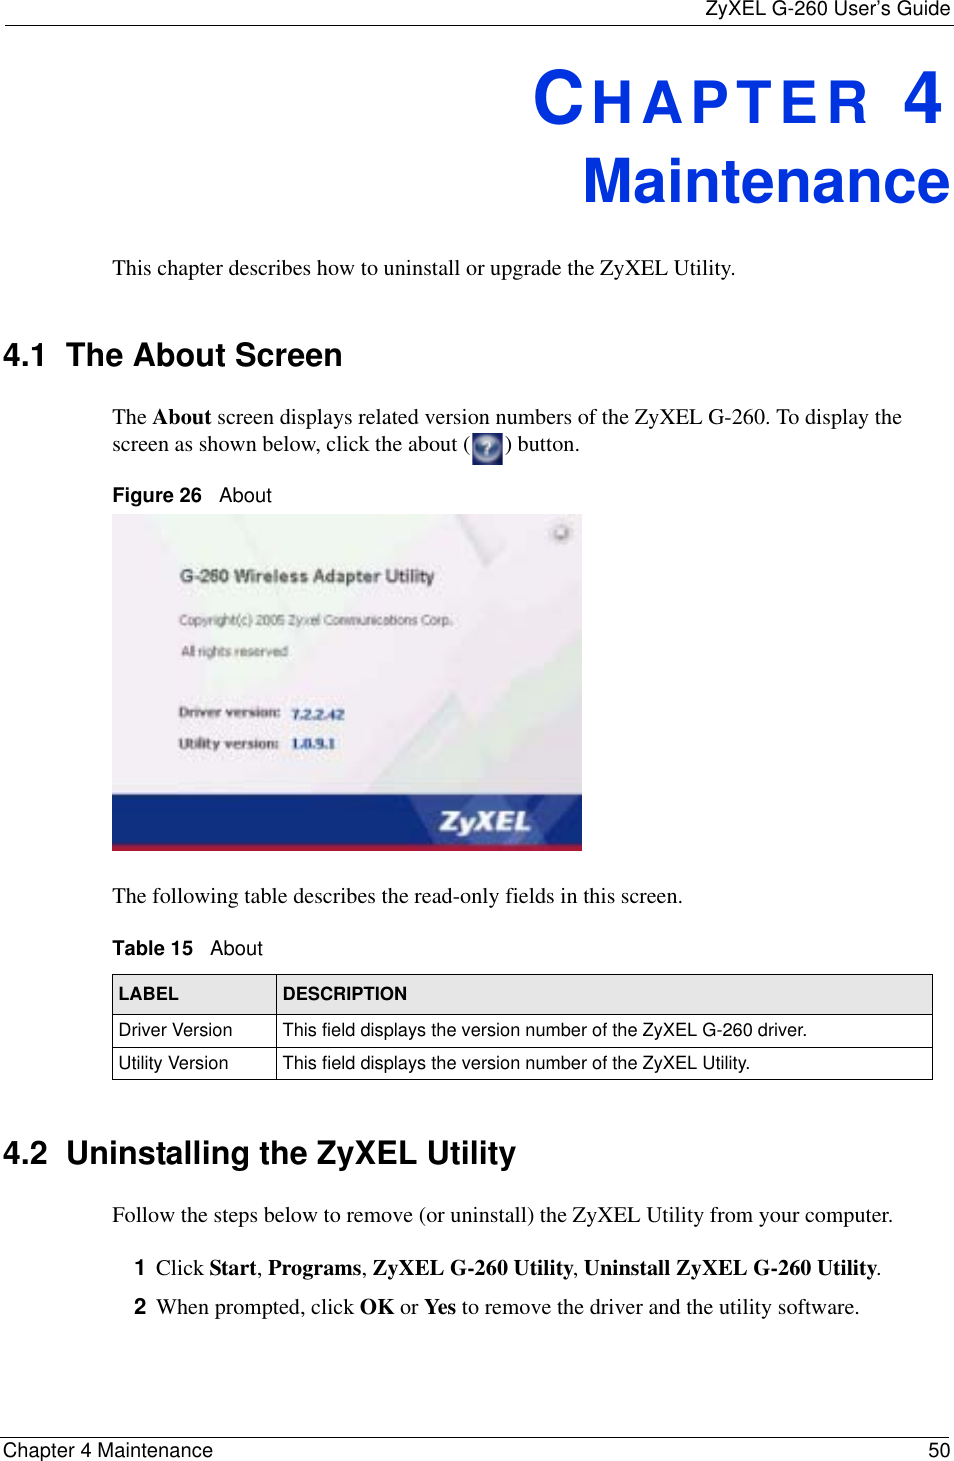 ZyXEL G-260 User’s GuideChapter 4 Maintenance 50CHAPTER 4MaintenanceThis chapter describes how to uninstall or upgrade the ZyXEL Utility.4.1  The About Screen The About screen displays related version numbers of the ZyXEL G-260. To display the screen as shown below, click the about ( ) button.Figure 26   About The following table describes the read-only fields in this screen. 4.2  Uninstalling the ZyXEL Utility Follow the steps below to remove (or uninstall) the ZyXEL Utility from your computer.1Click Start,Programs,ZyXEL G-260 Utility,Uninstall ZyXEL G-260 Utility.2When prompted, click OK or Yes to remove the driver and the utility software.Table 15   About LABEL DESCRIPTIONDriver Version This field displays the version number of the ZyXEL G-260 driver.Utility Version This field displays the version number of the ZyXEL Utility.